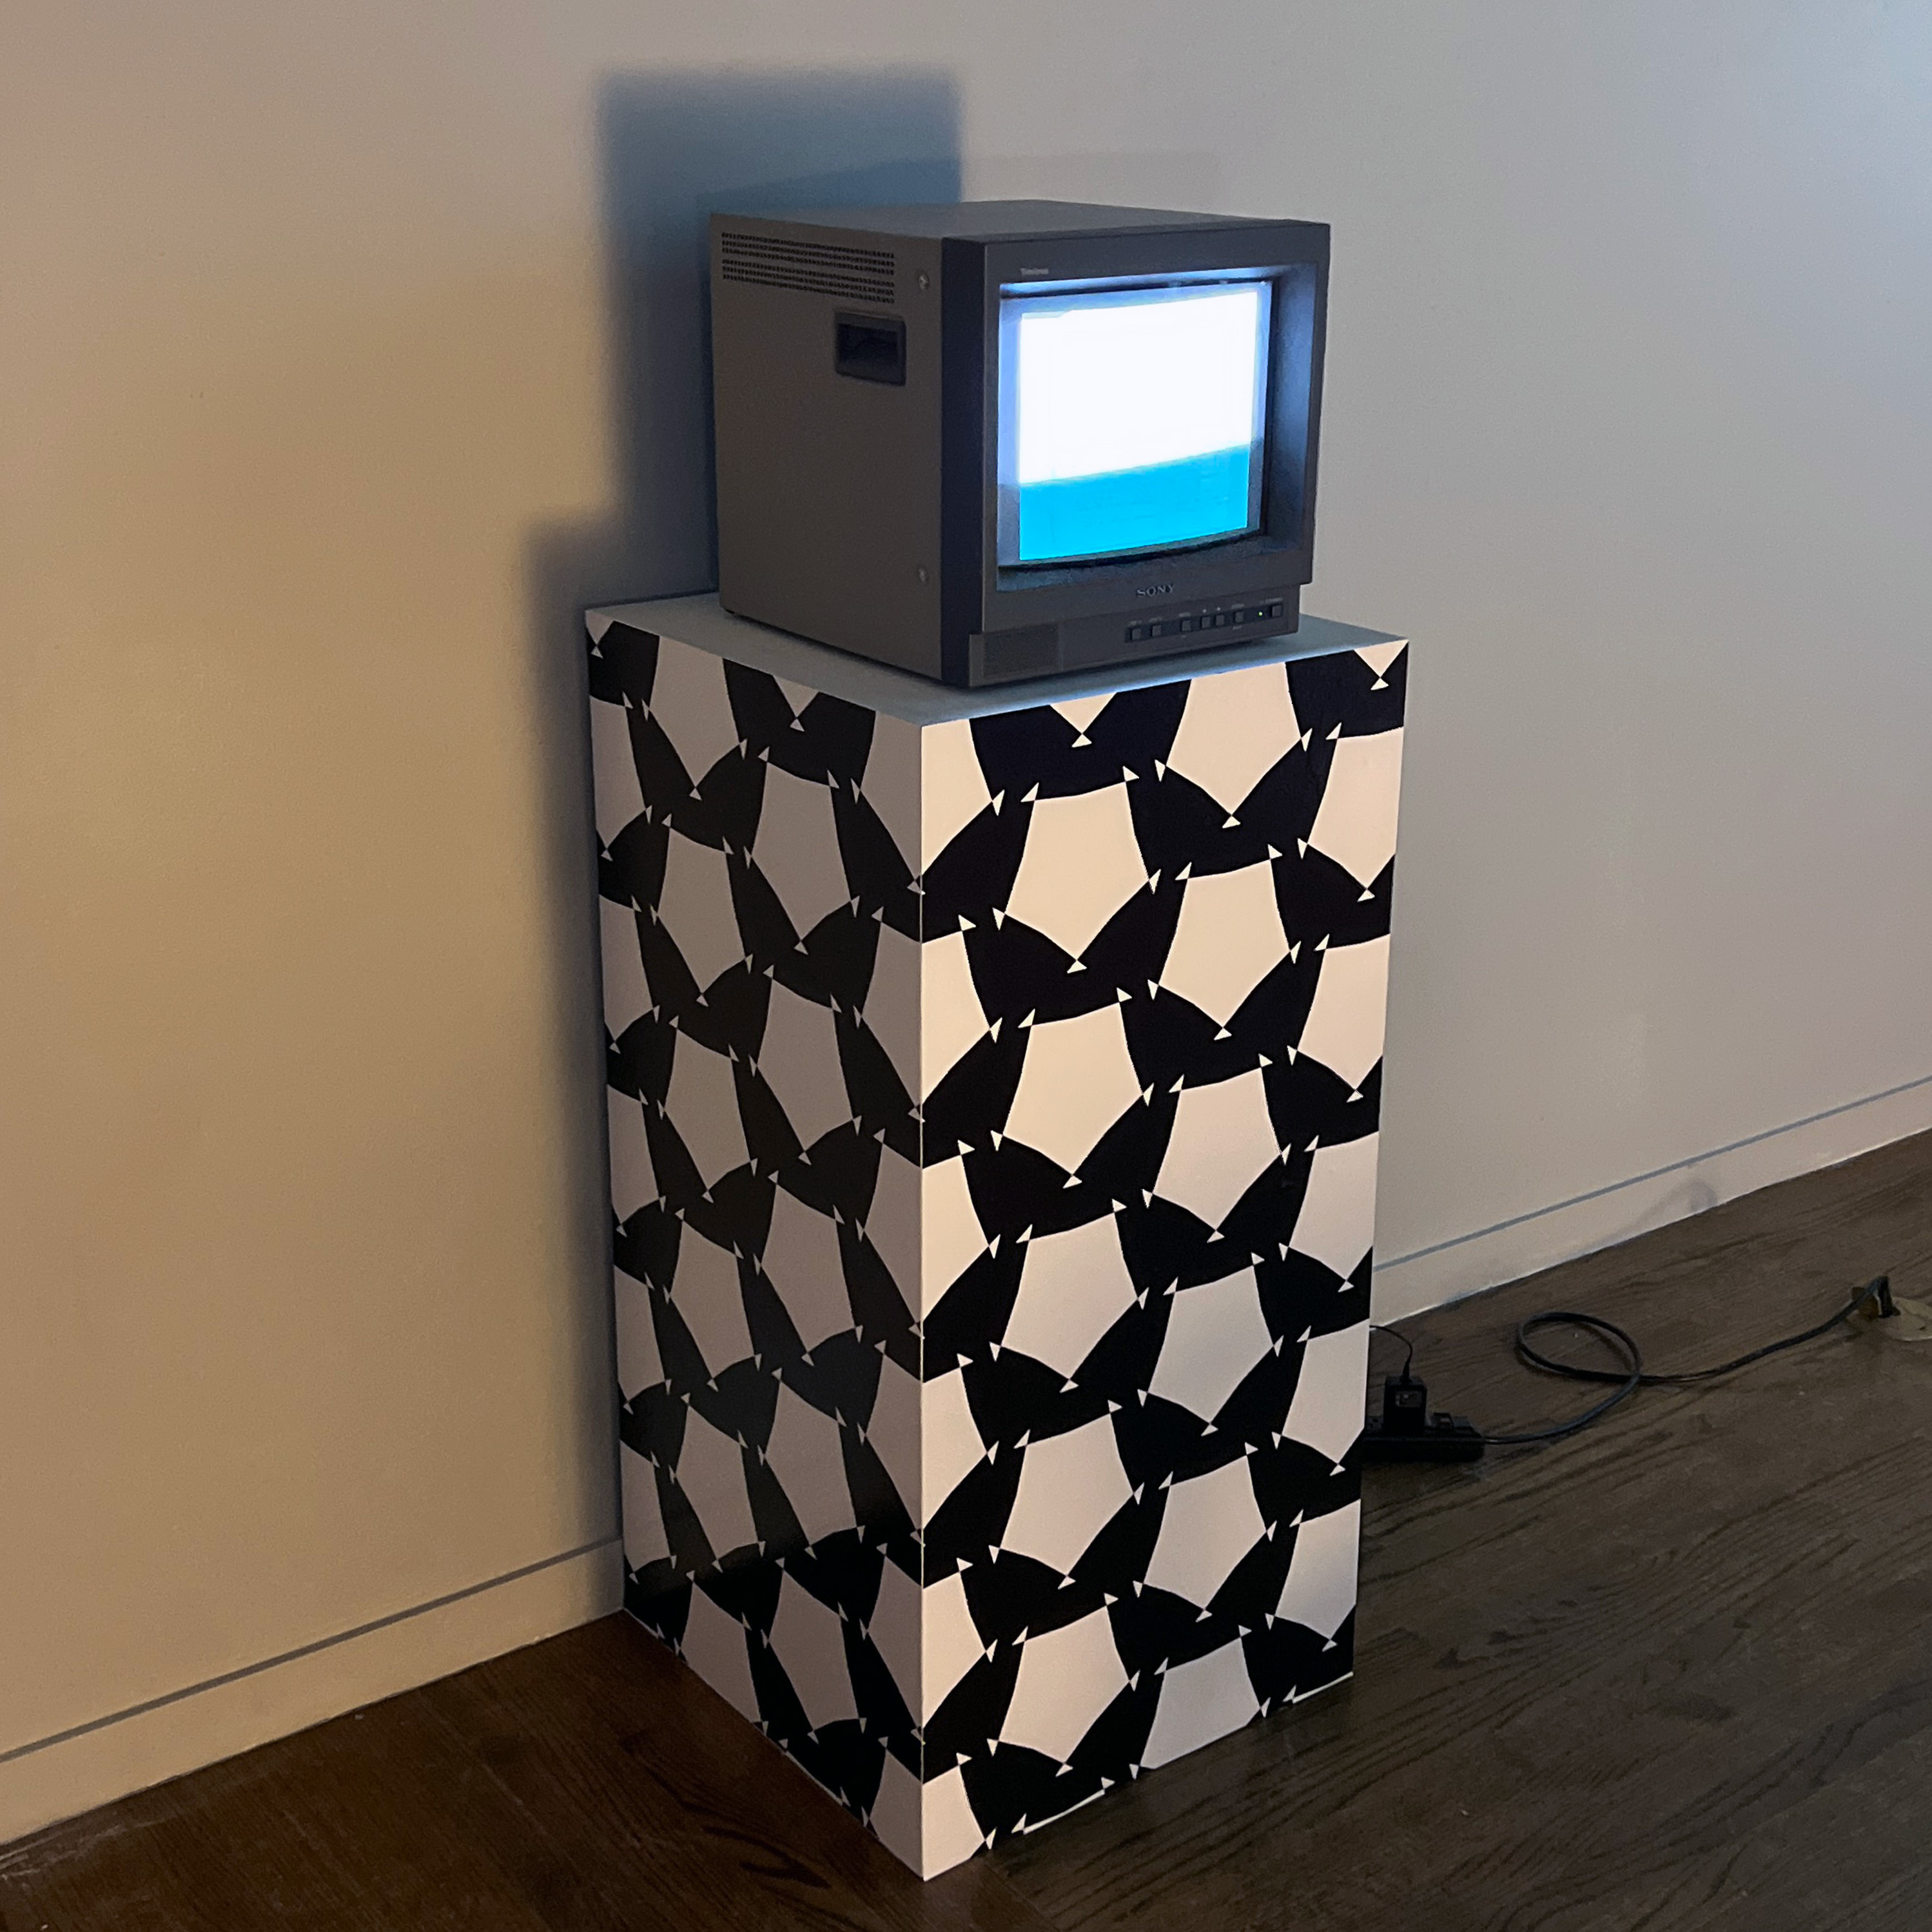 Pedestal in exhibition with generative patterns